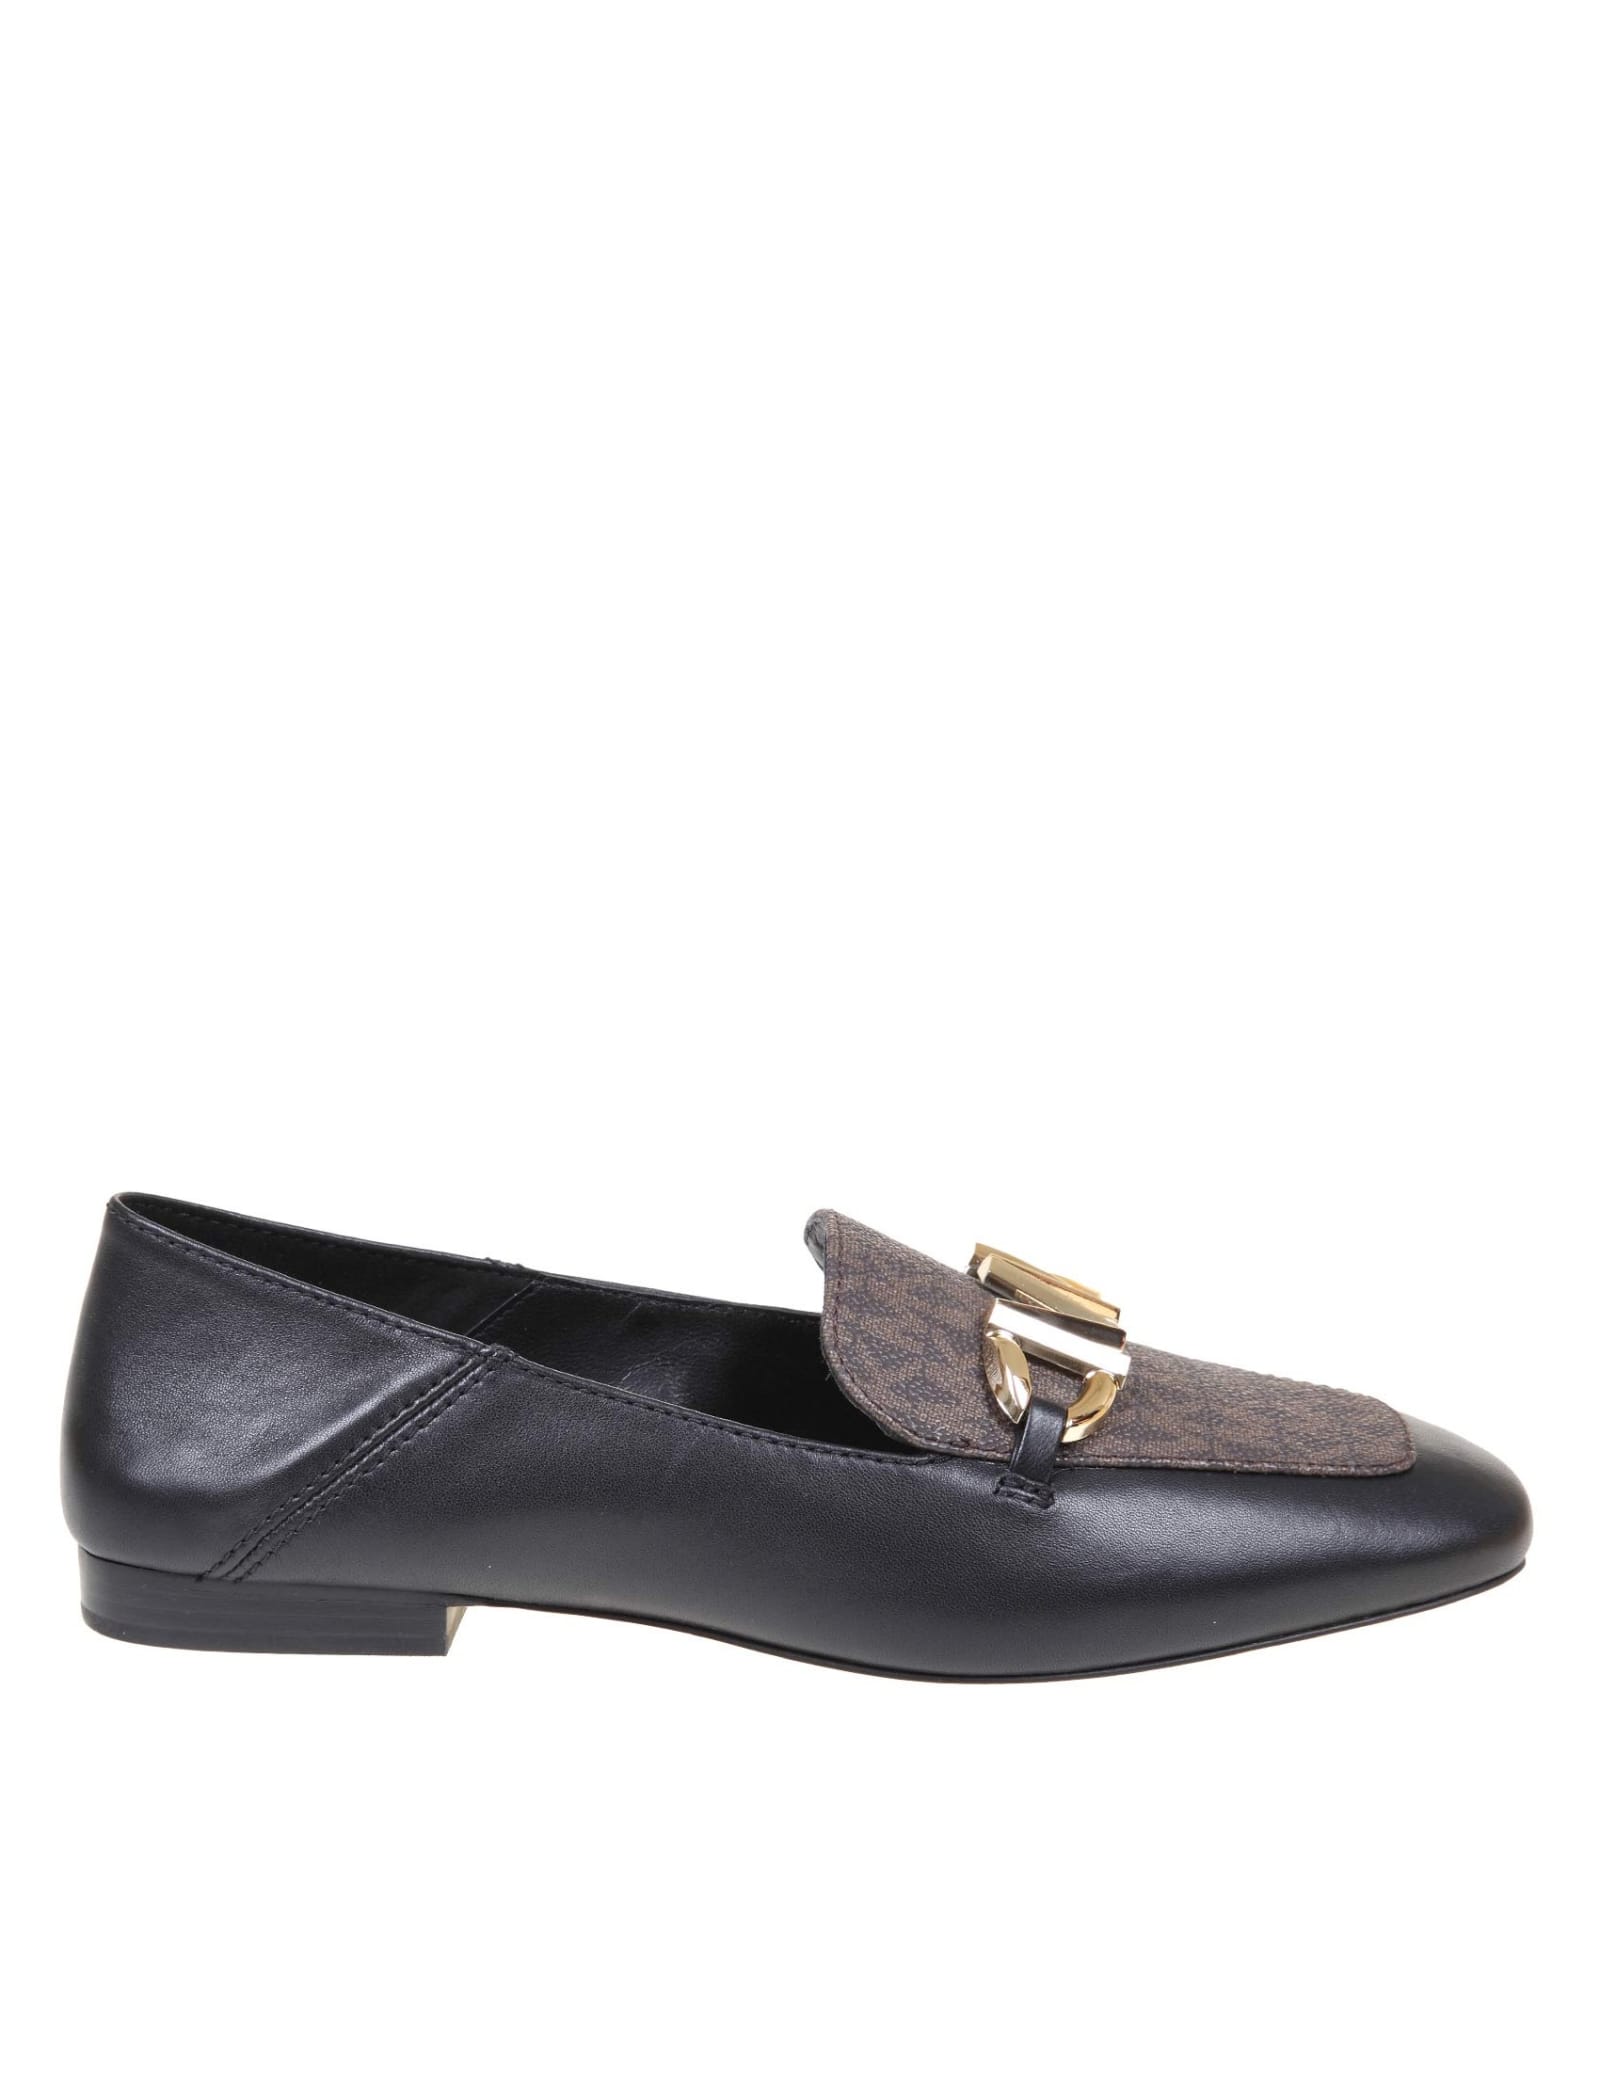 Michael Kors Izzy Loafer In Black Leather